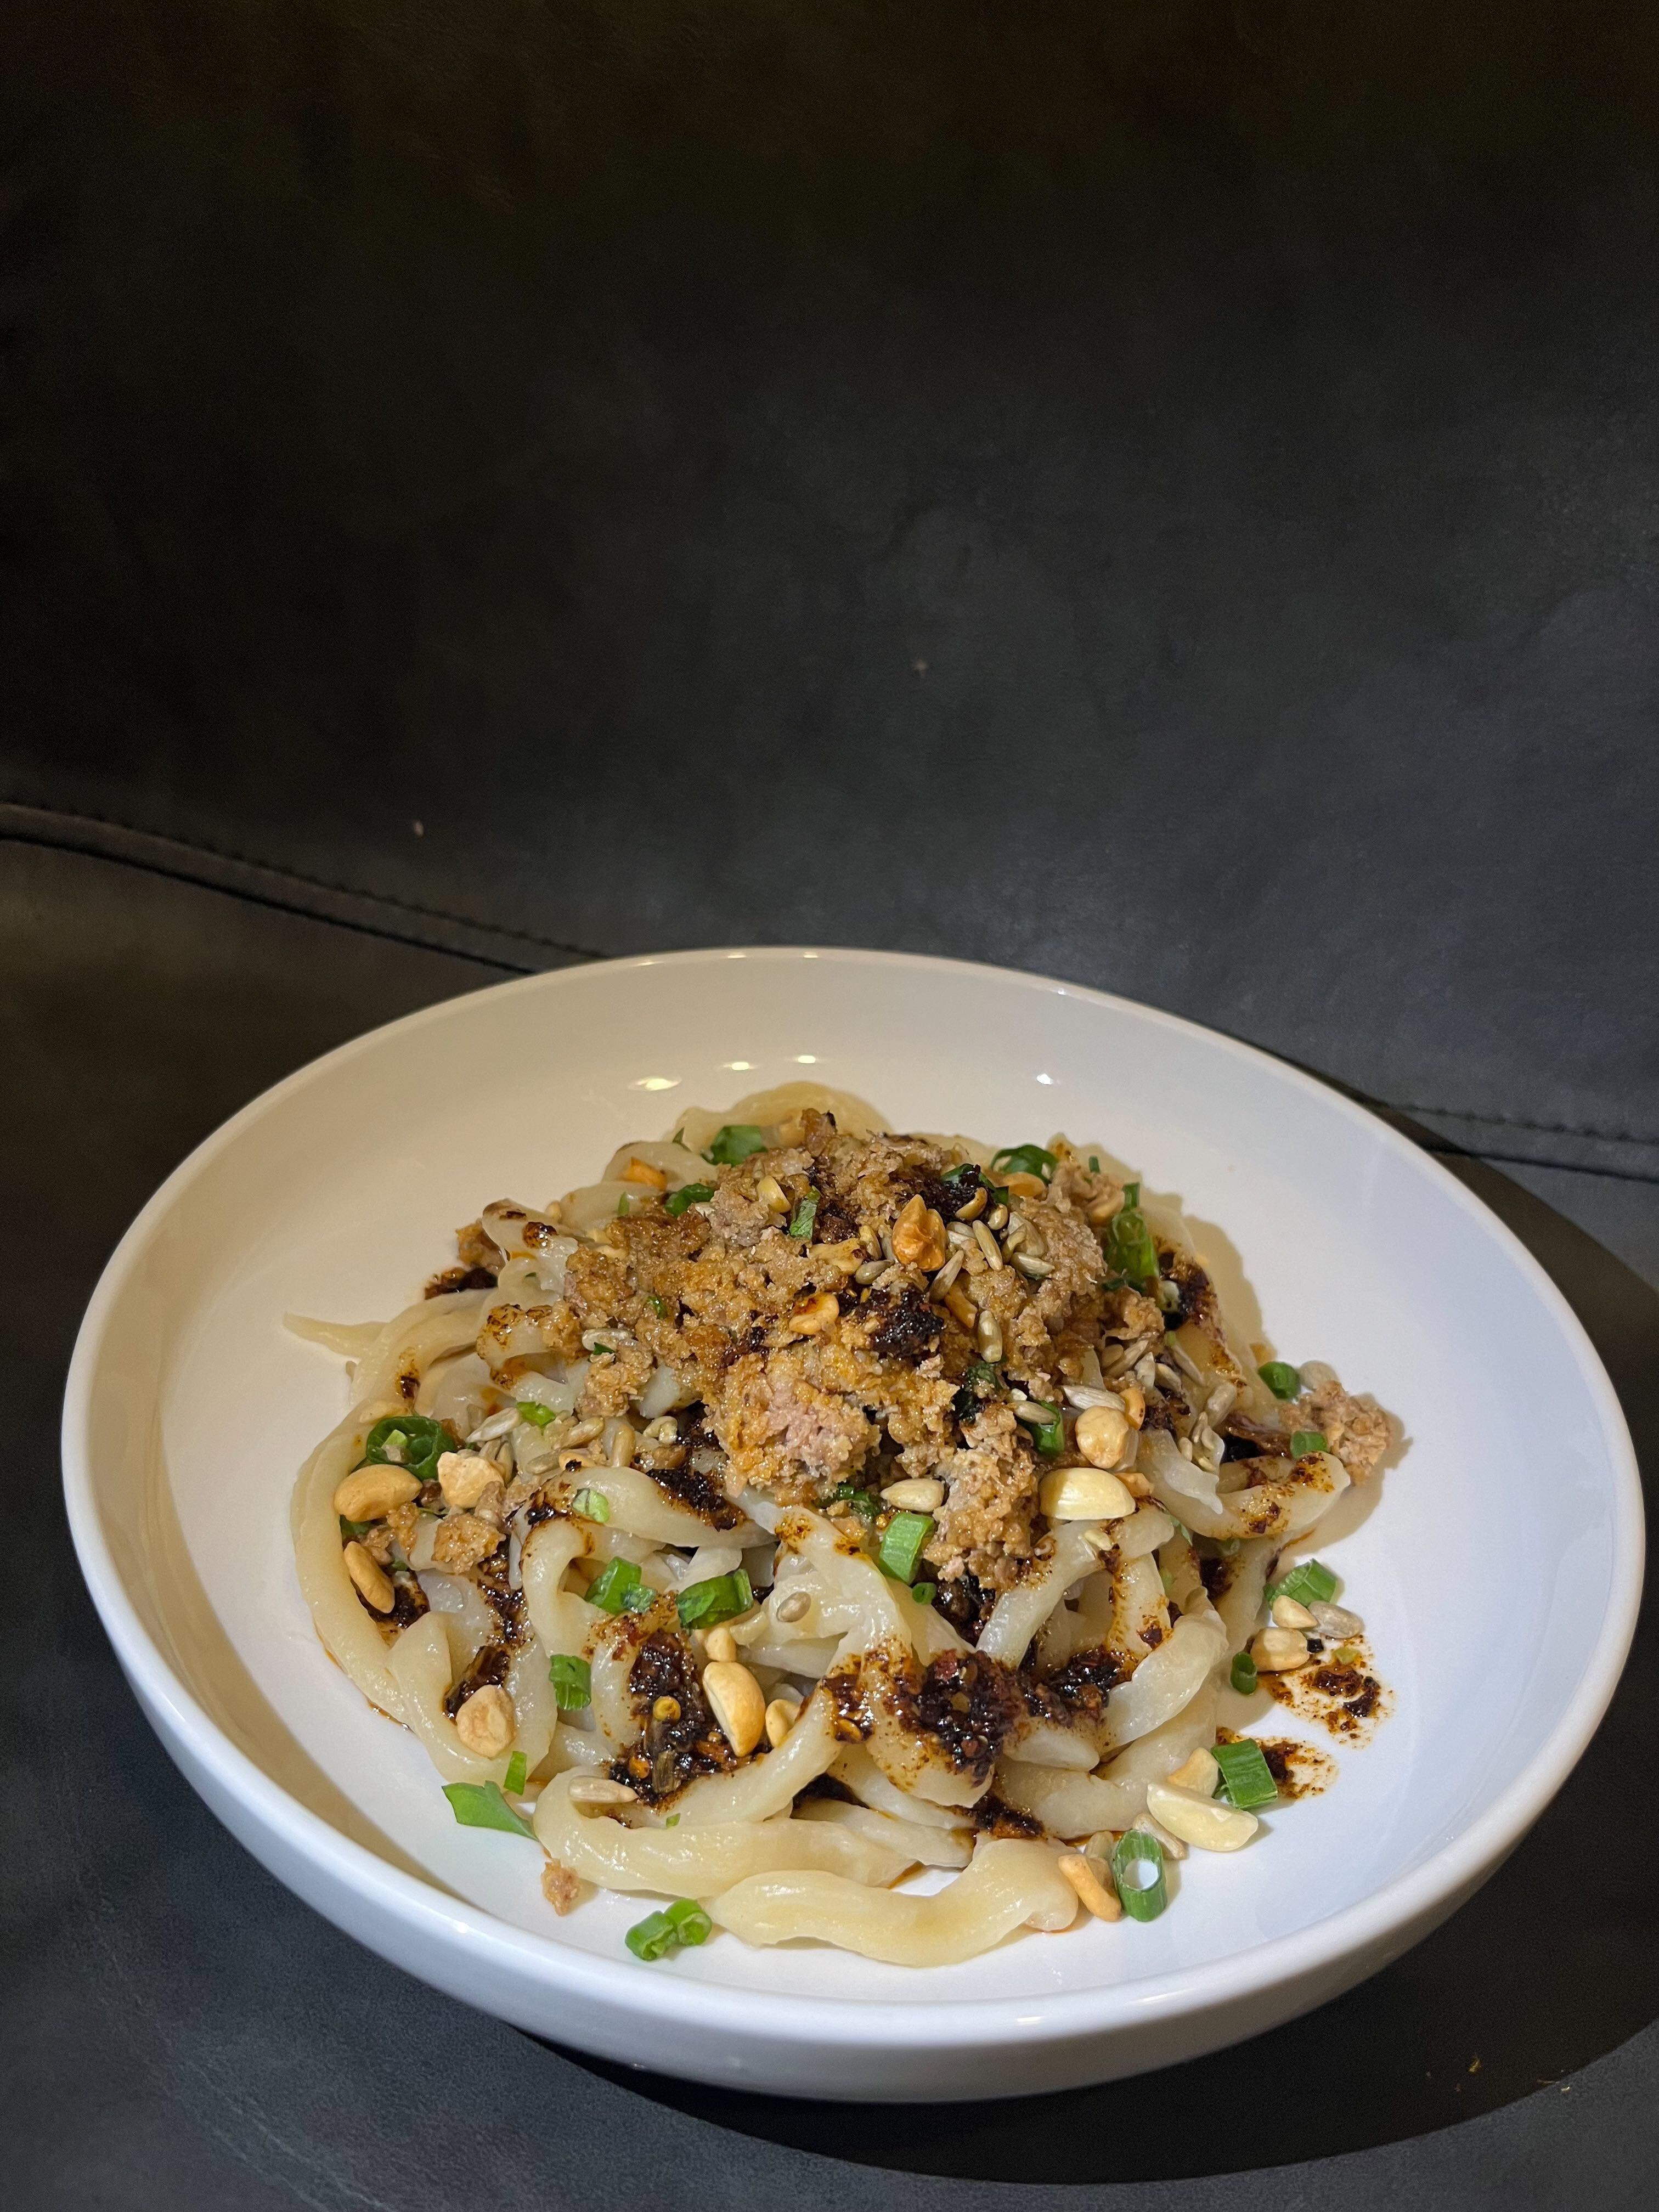 (Baylei Foster) Sweet water noodles with ground pork, housemade chili crisp, cilantro, garlic and onion greens from Sego are shown in this undated photo. The noodles are made with Redmond Real Salt and Central Milling Flour. The pork is from Roots Tech Farm. The veggies are from Red Acre Farm.